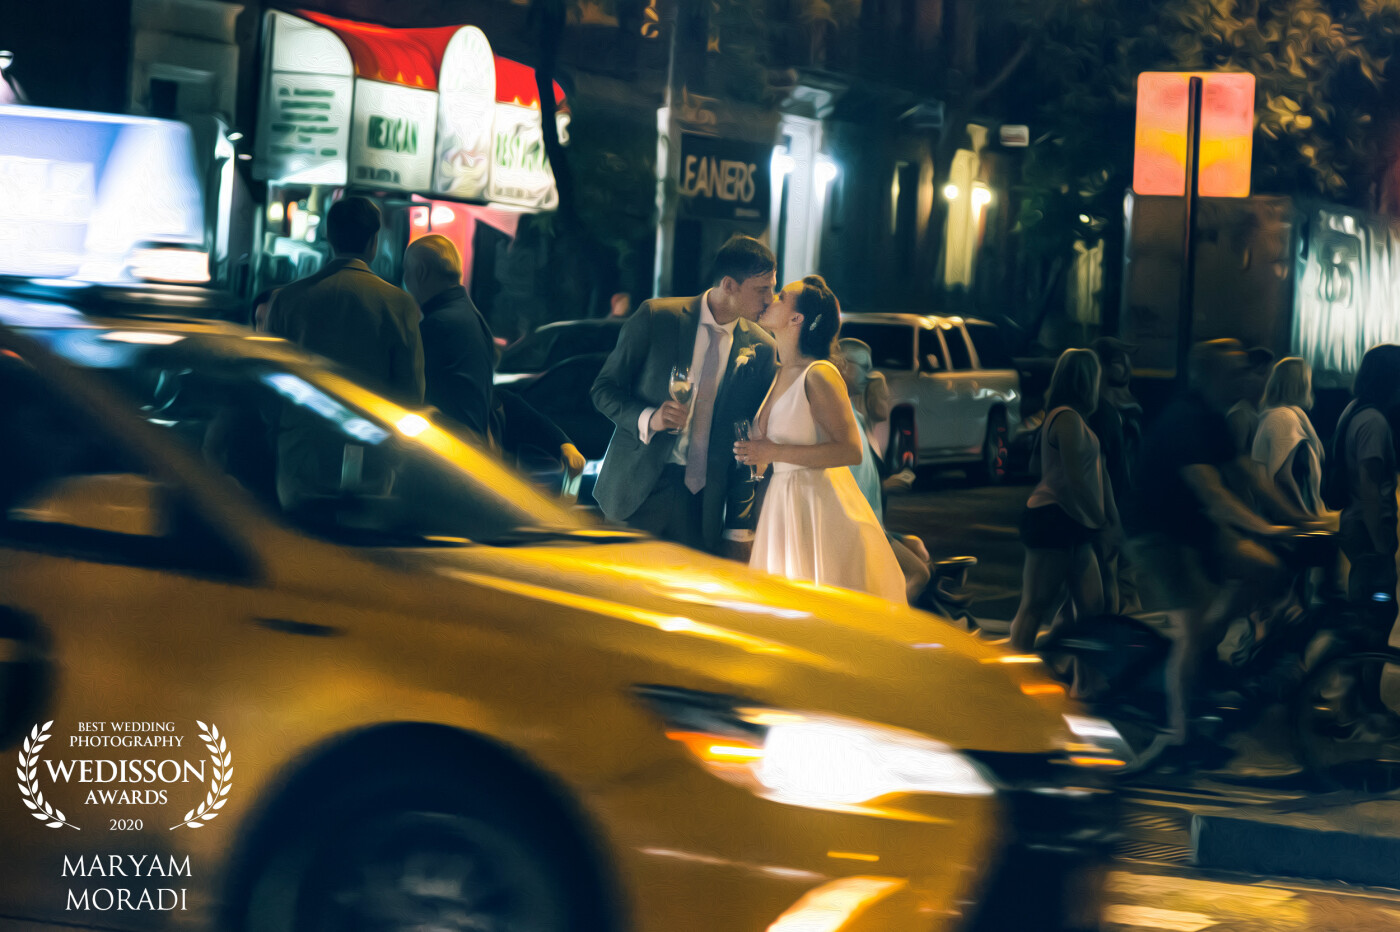 The Last picture of the night with this lovely couple in the middle of Big Apple. One of my favorite images in the city.<br />
New York City, US.